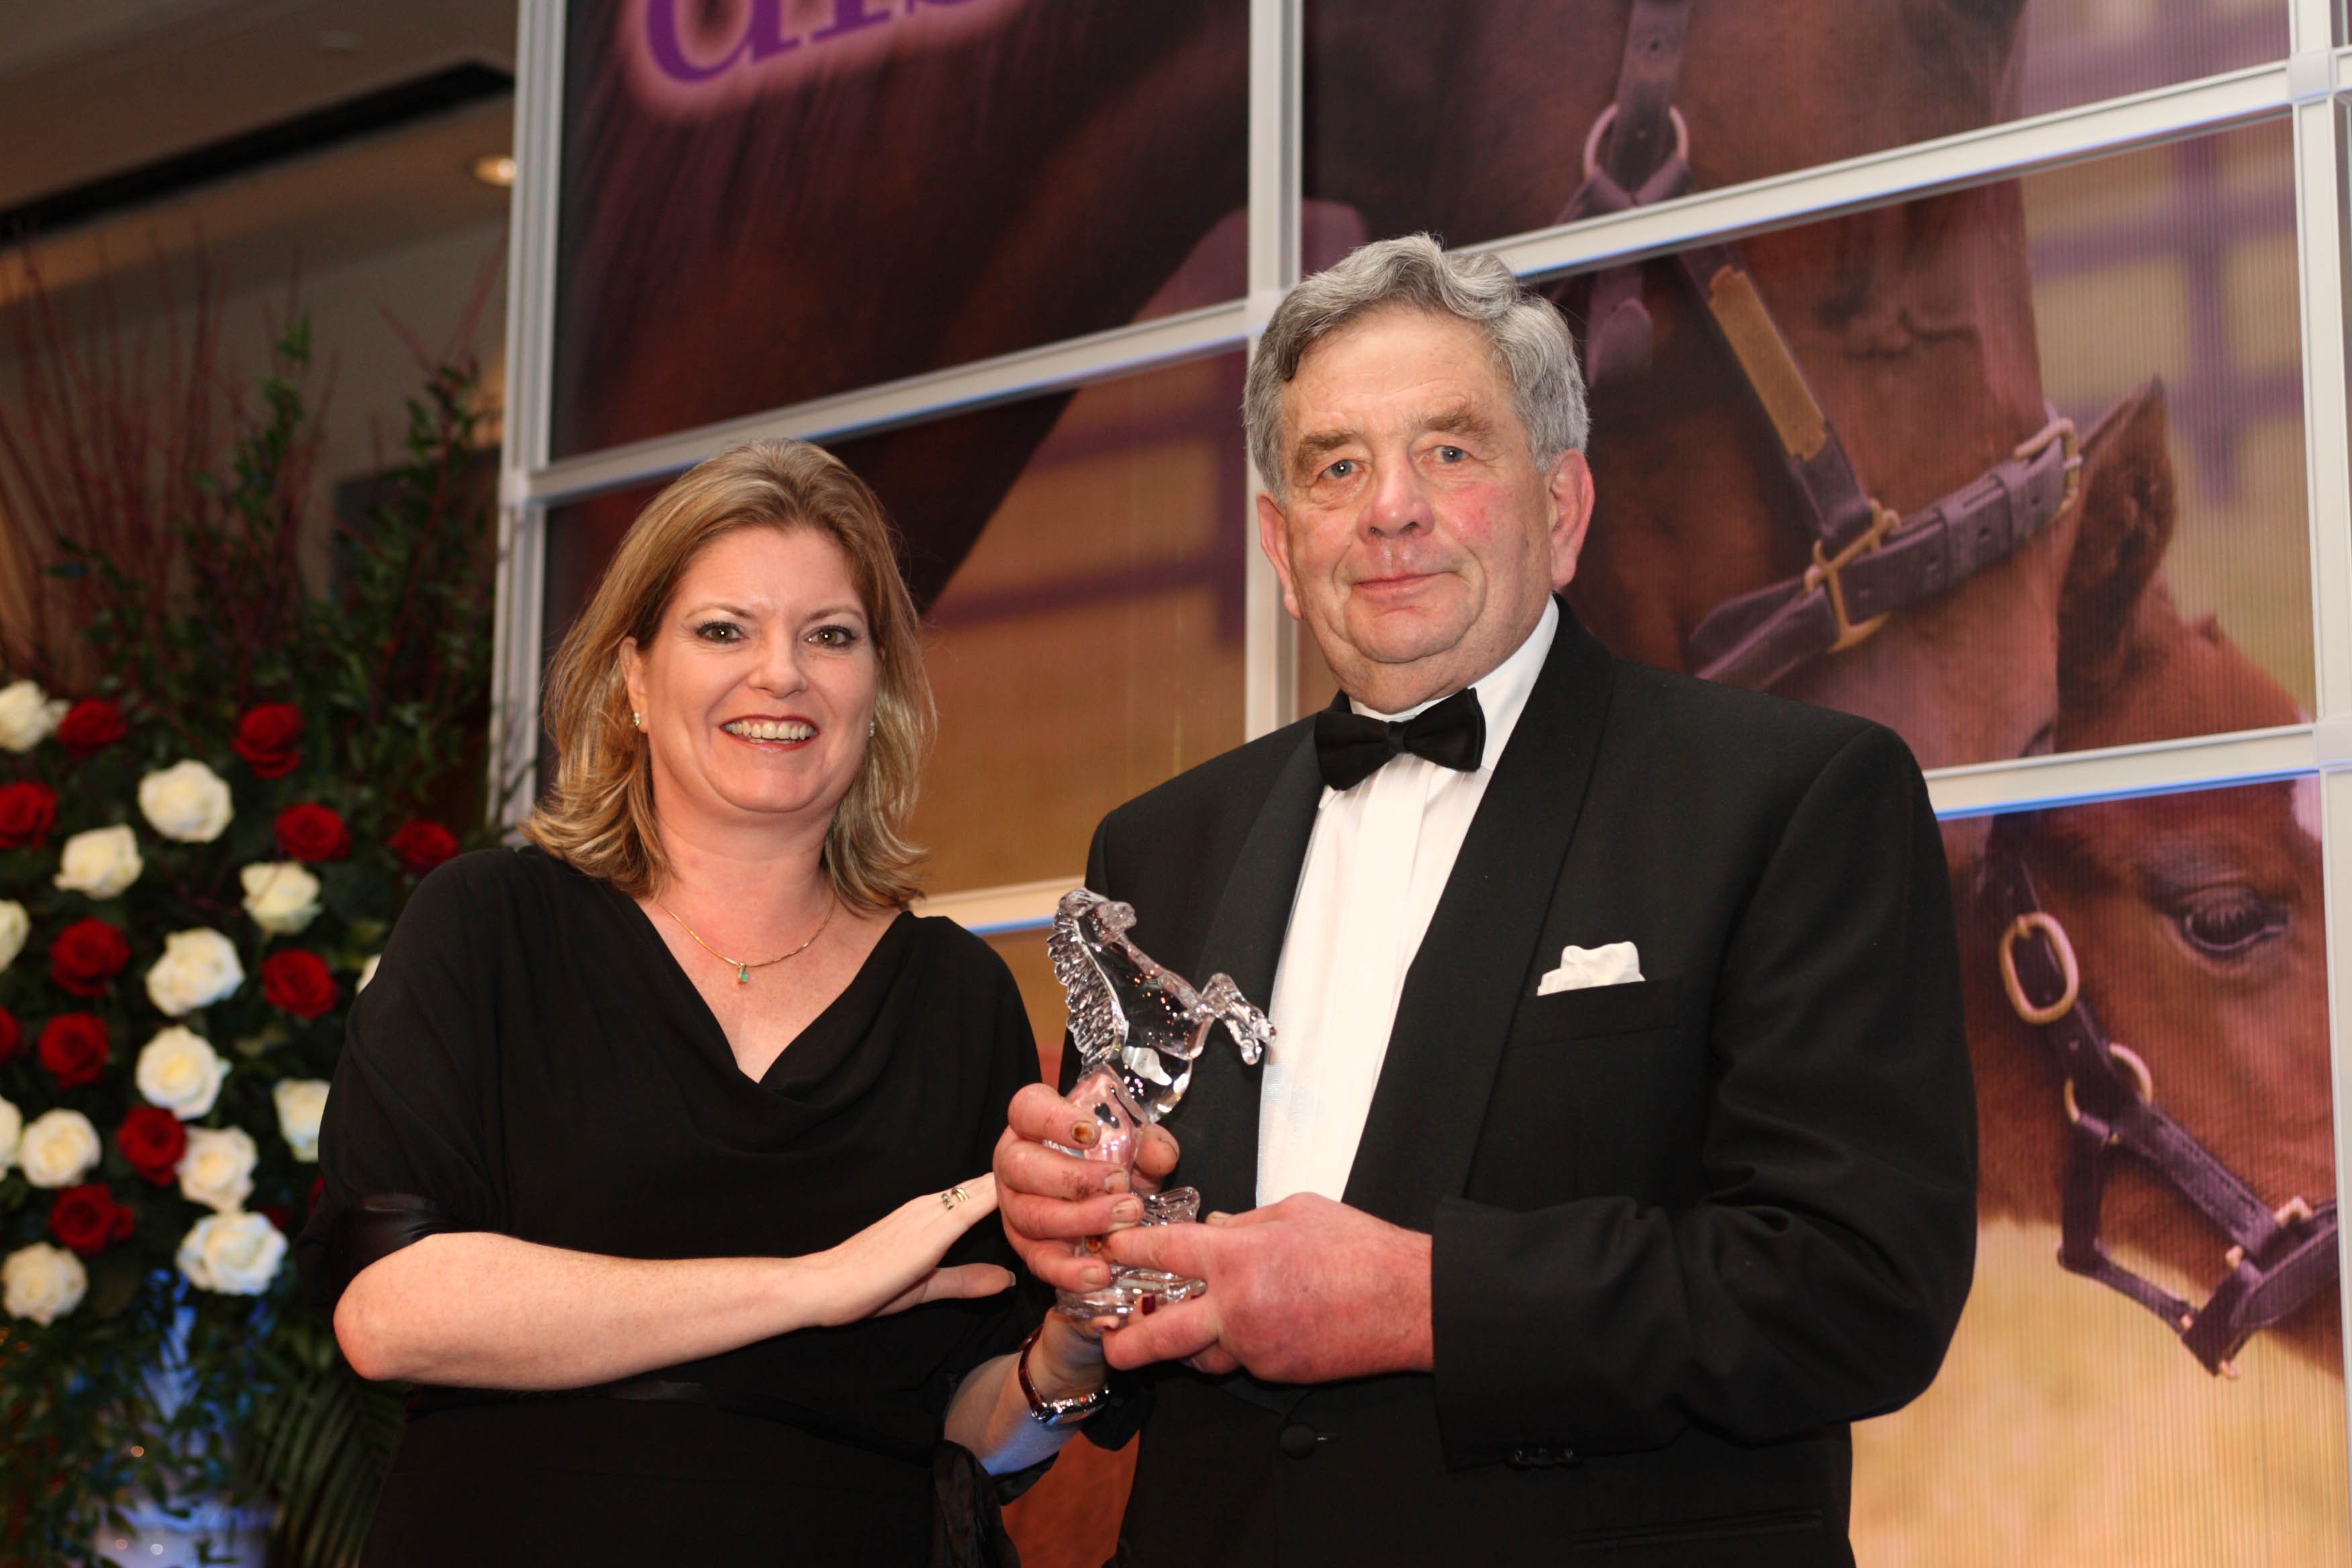 Petplan's Marketing Manager, Alison Andrew with Petplan's Equine Vet of the Year winner, David Denny